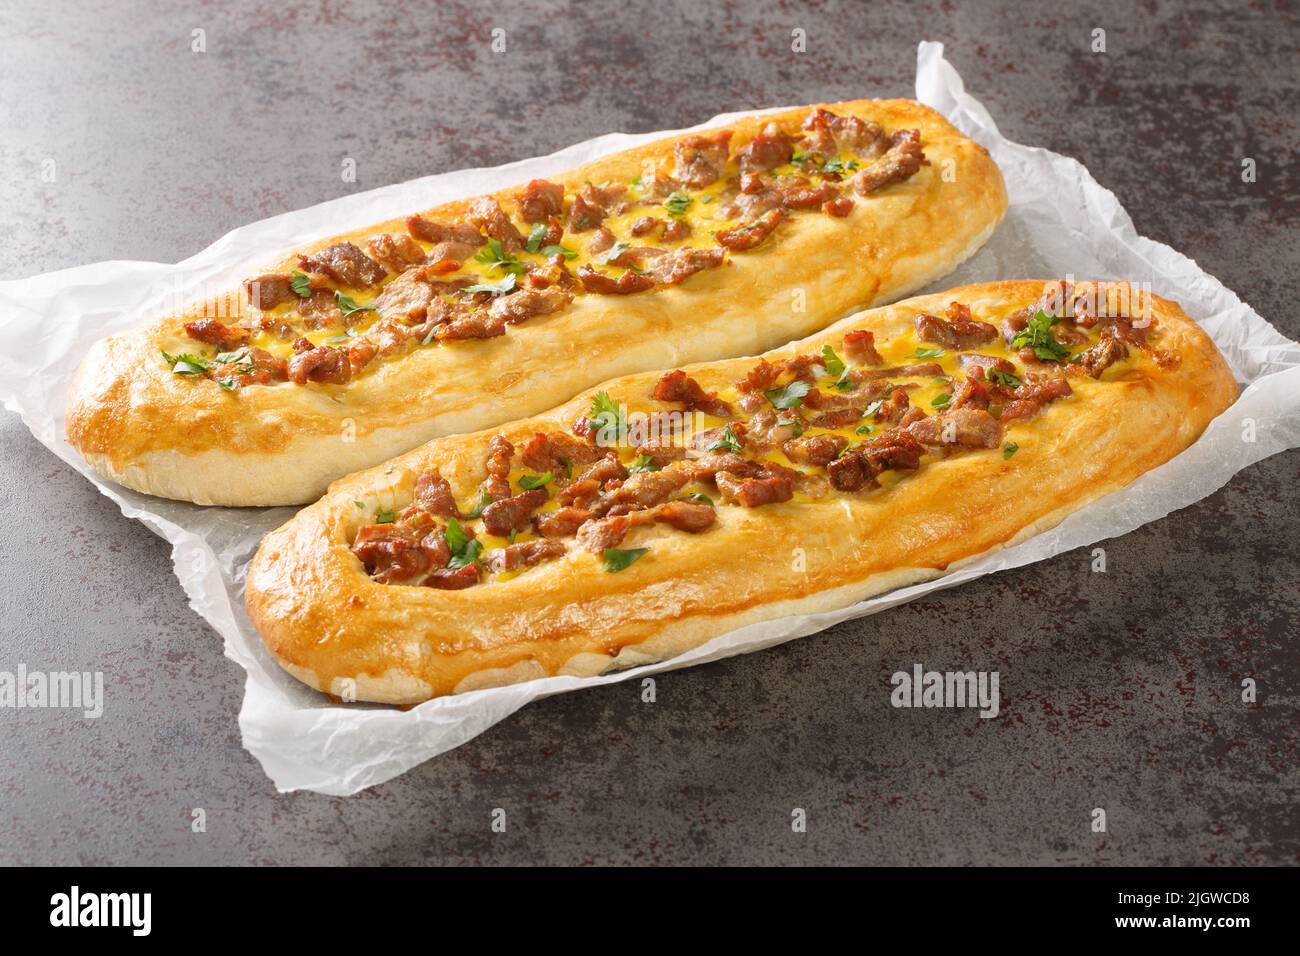 Pastrmajlija is an oval shaped pizza dough dressed with meat in the center and topped with an egg wash closeup on the parchment on the table. Horizont Stock Photo